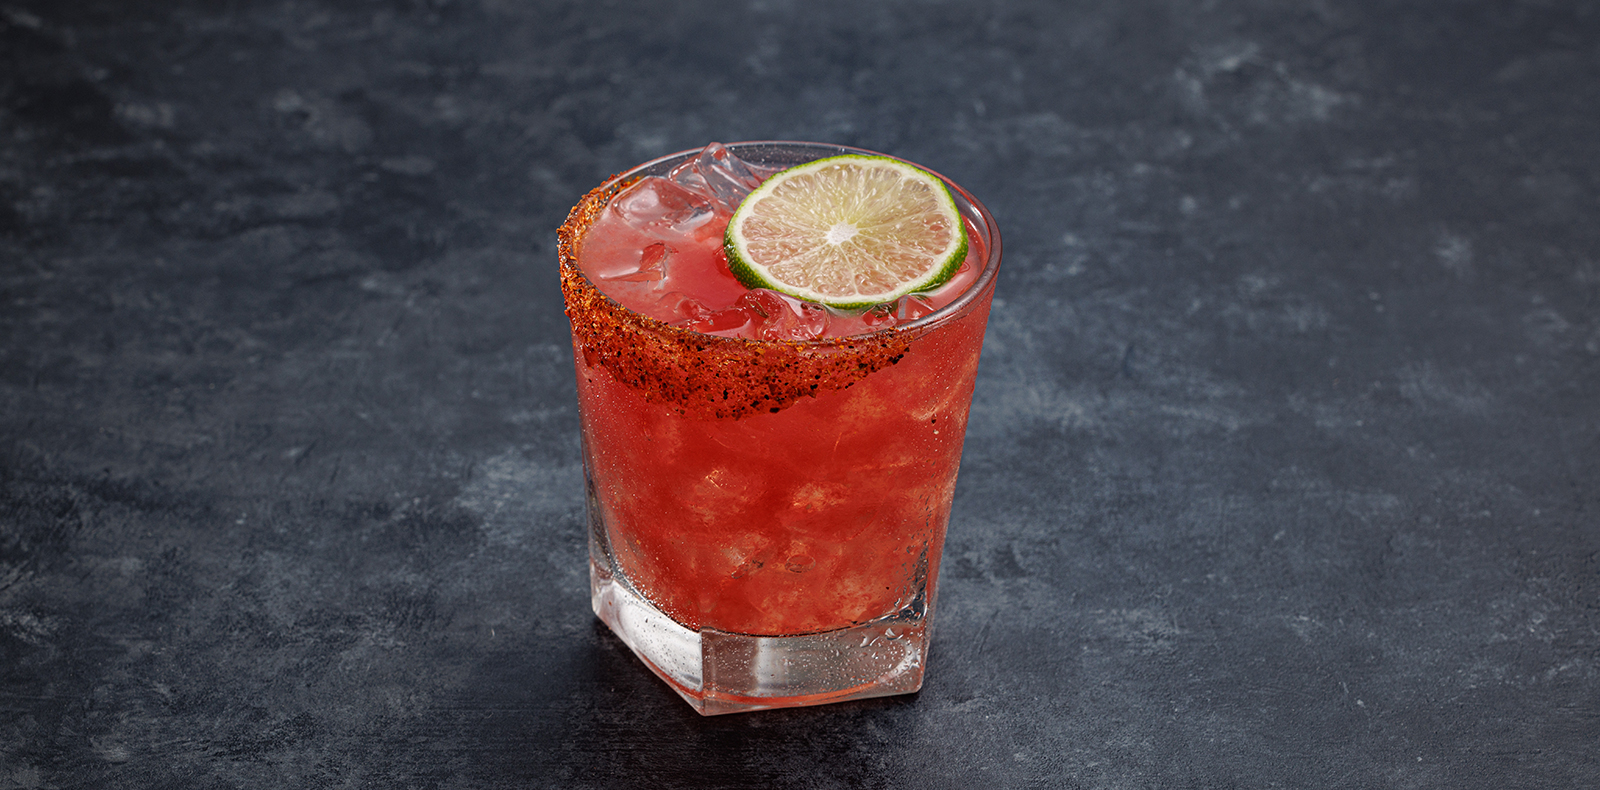 Lunazul Tequila, fresh watermelon, triple sec, our agave sweet + sour, and a Tajín Chamoy rim. Also available on the happy hour and late-night happy hour menus